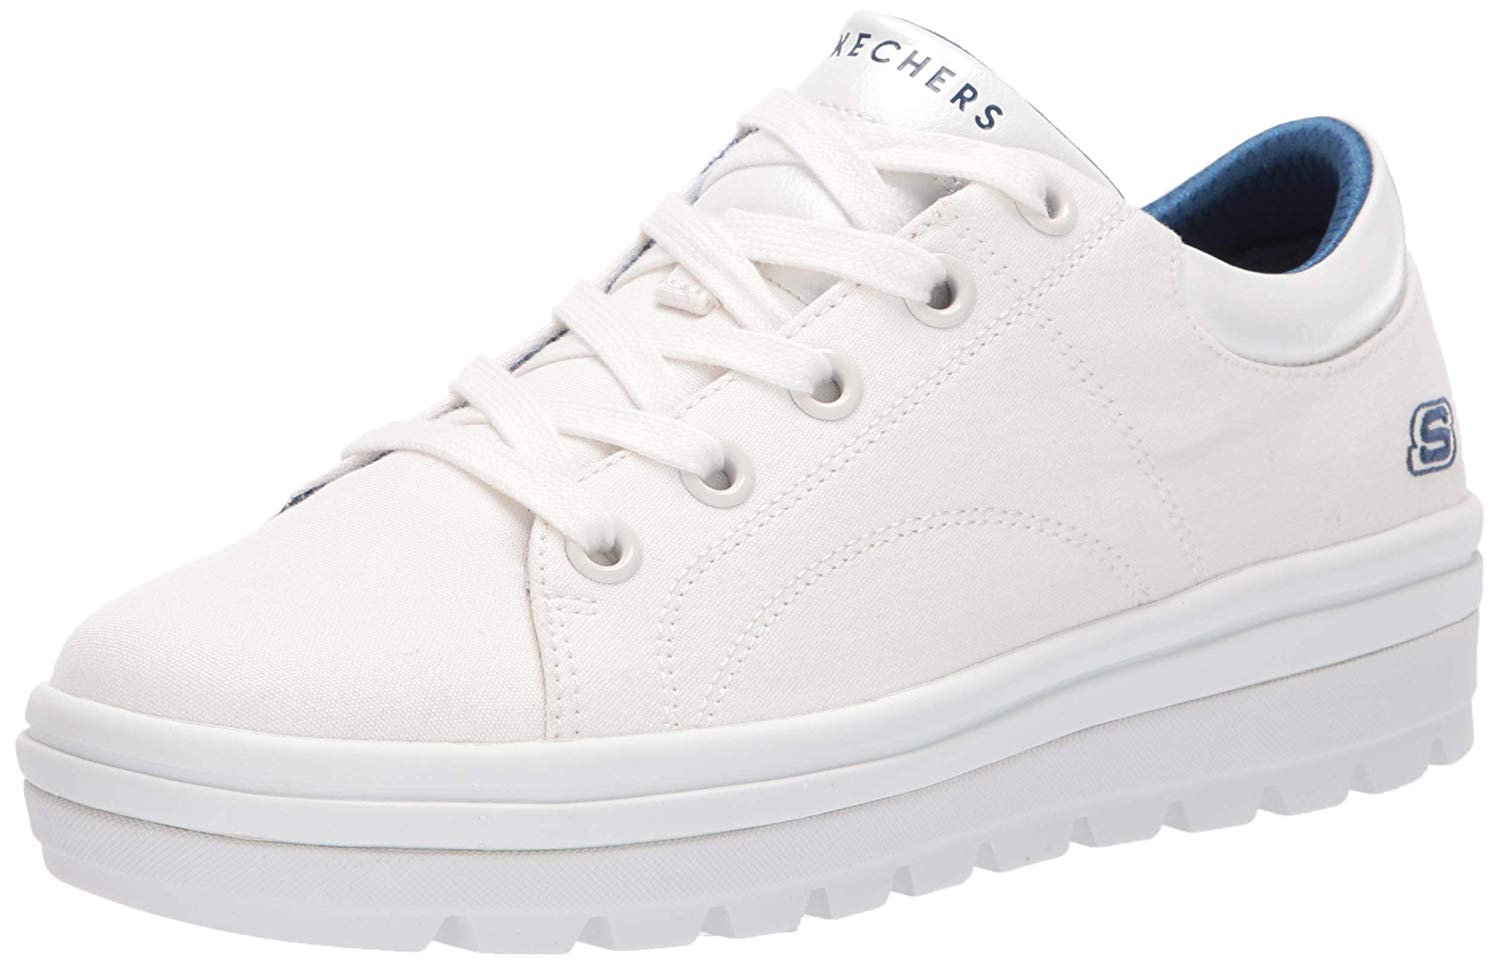 Skechers Women's Street Cleat. Canvas Contrast Stitch Lace Up, White ...